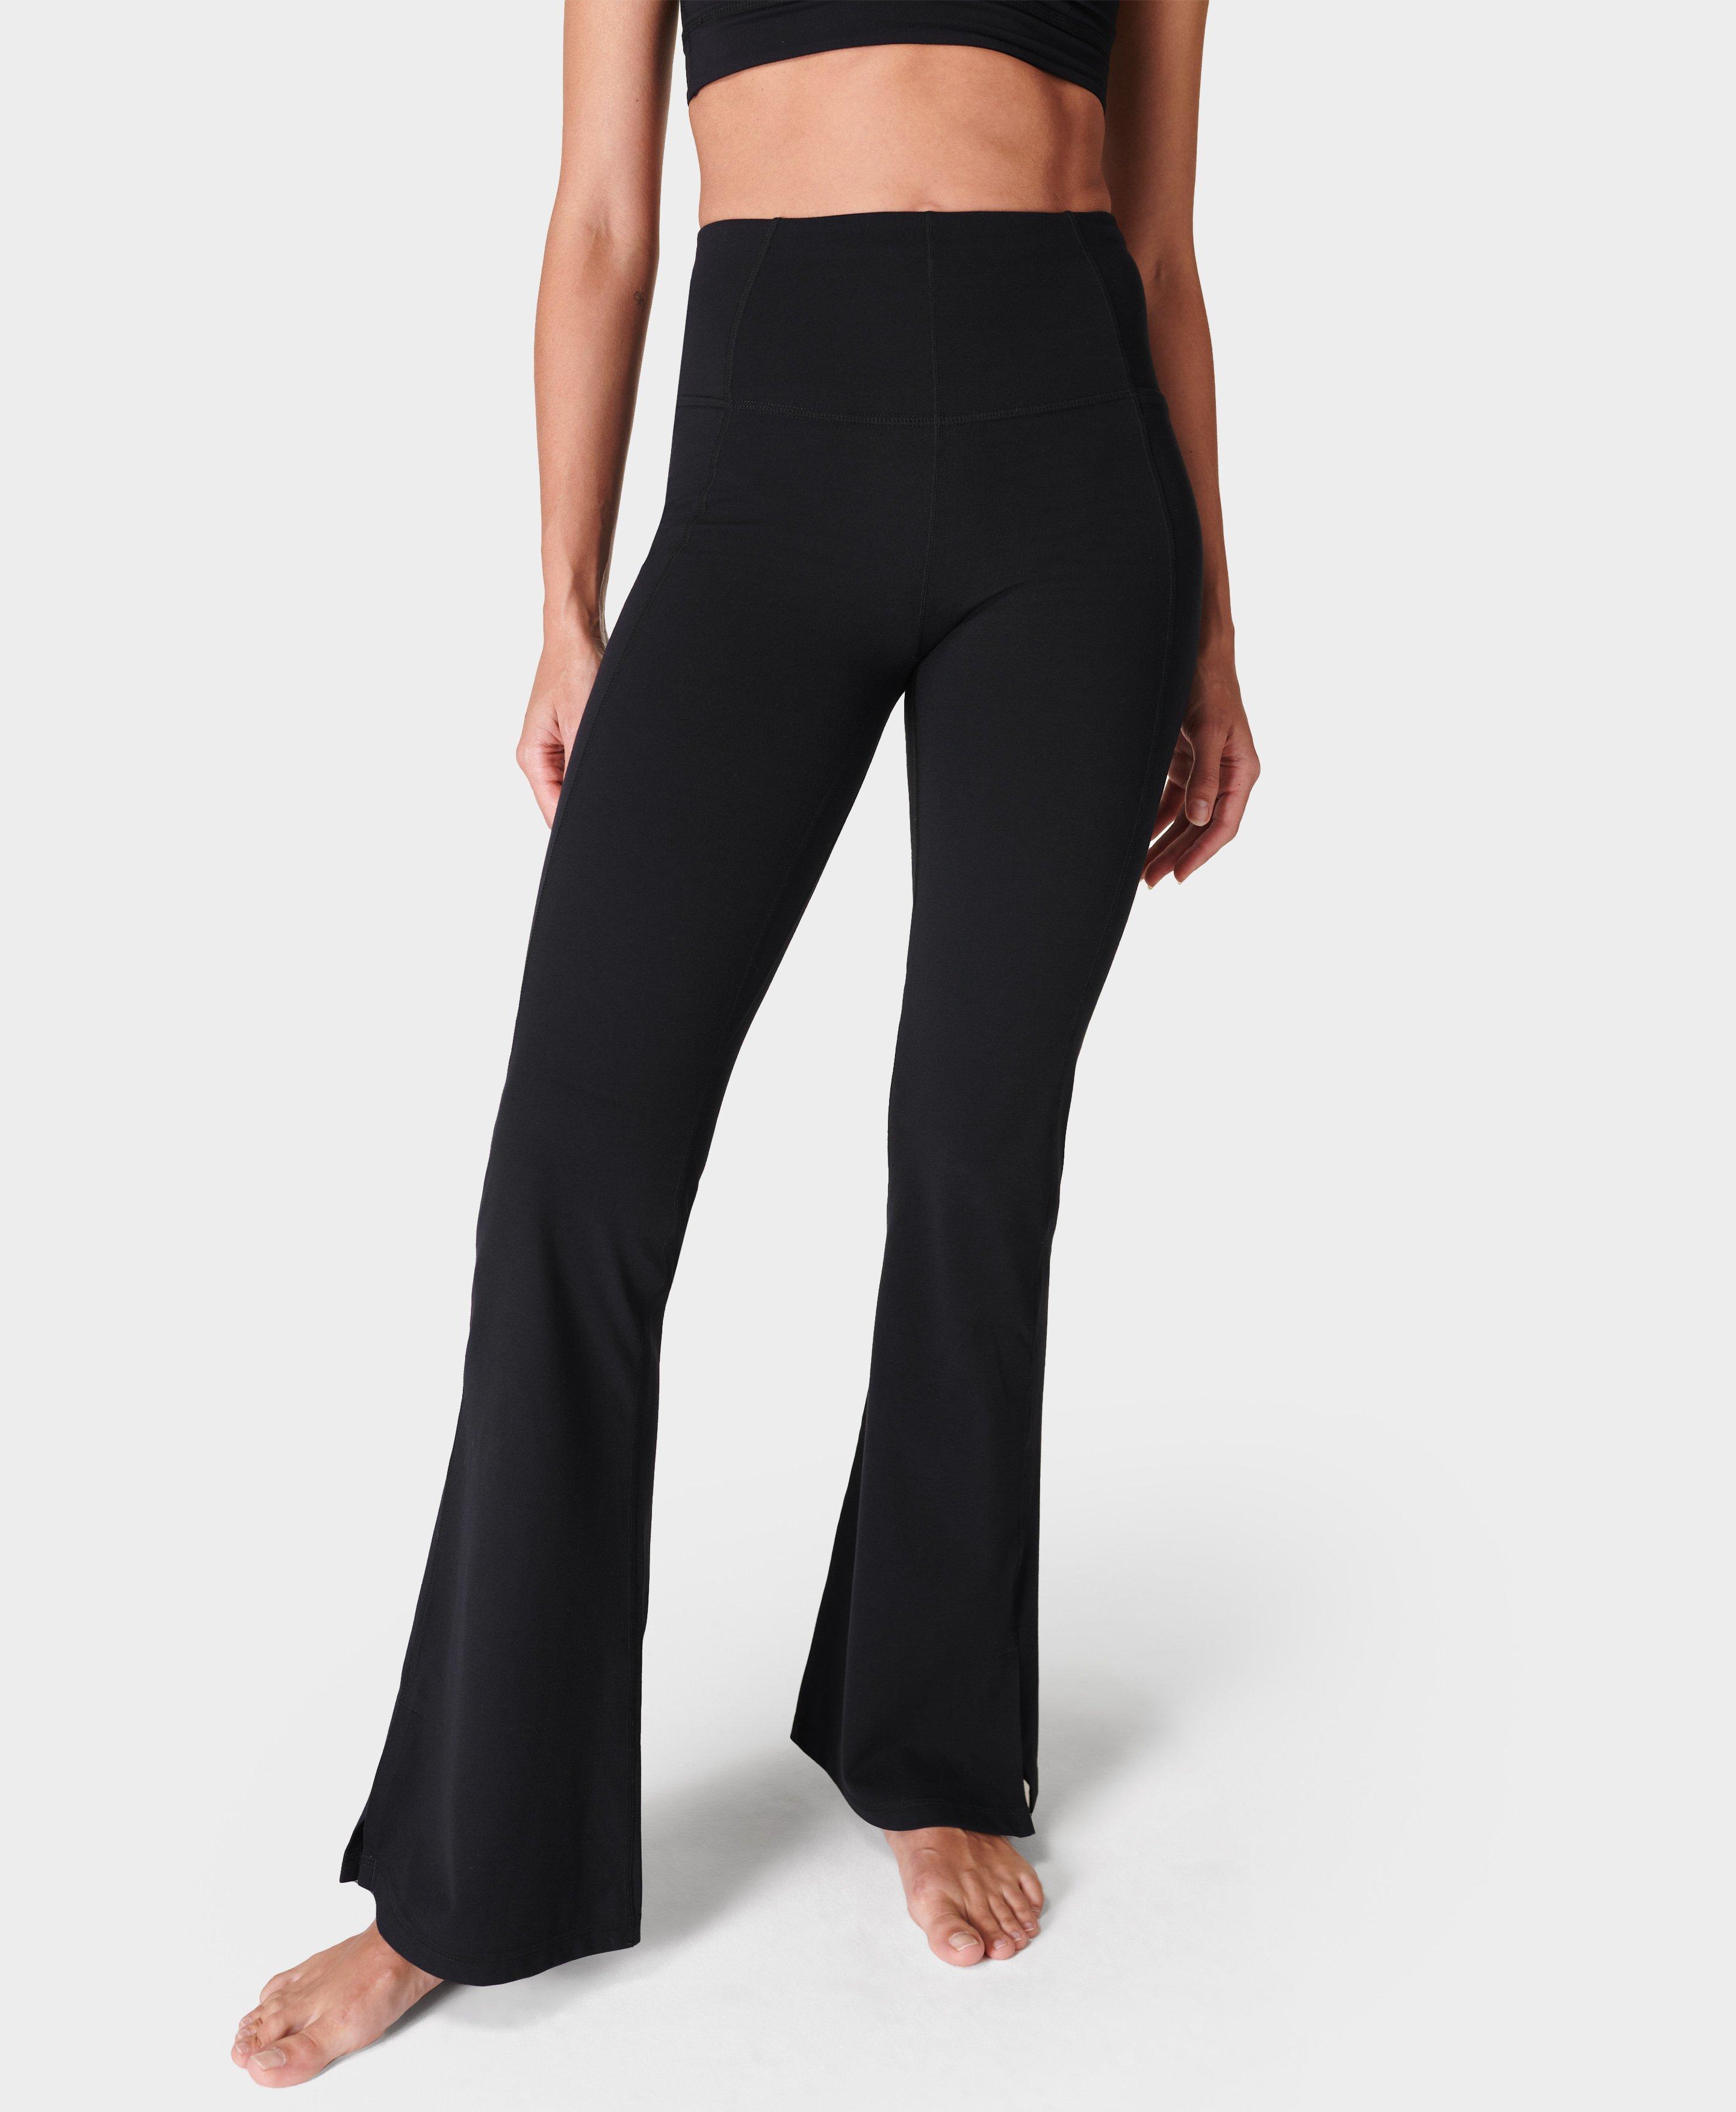 Womens High Waist Running And Flared Black Yoga Pants With Groove Flares  For Tight Belly And Nine Minute Workout Athletic Sports Sweatpants For Yoga  And Fitness From Top_sport_mall, $19.33